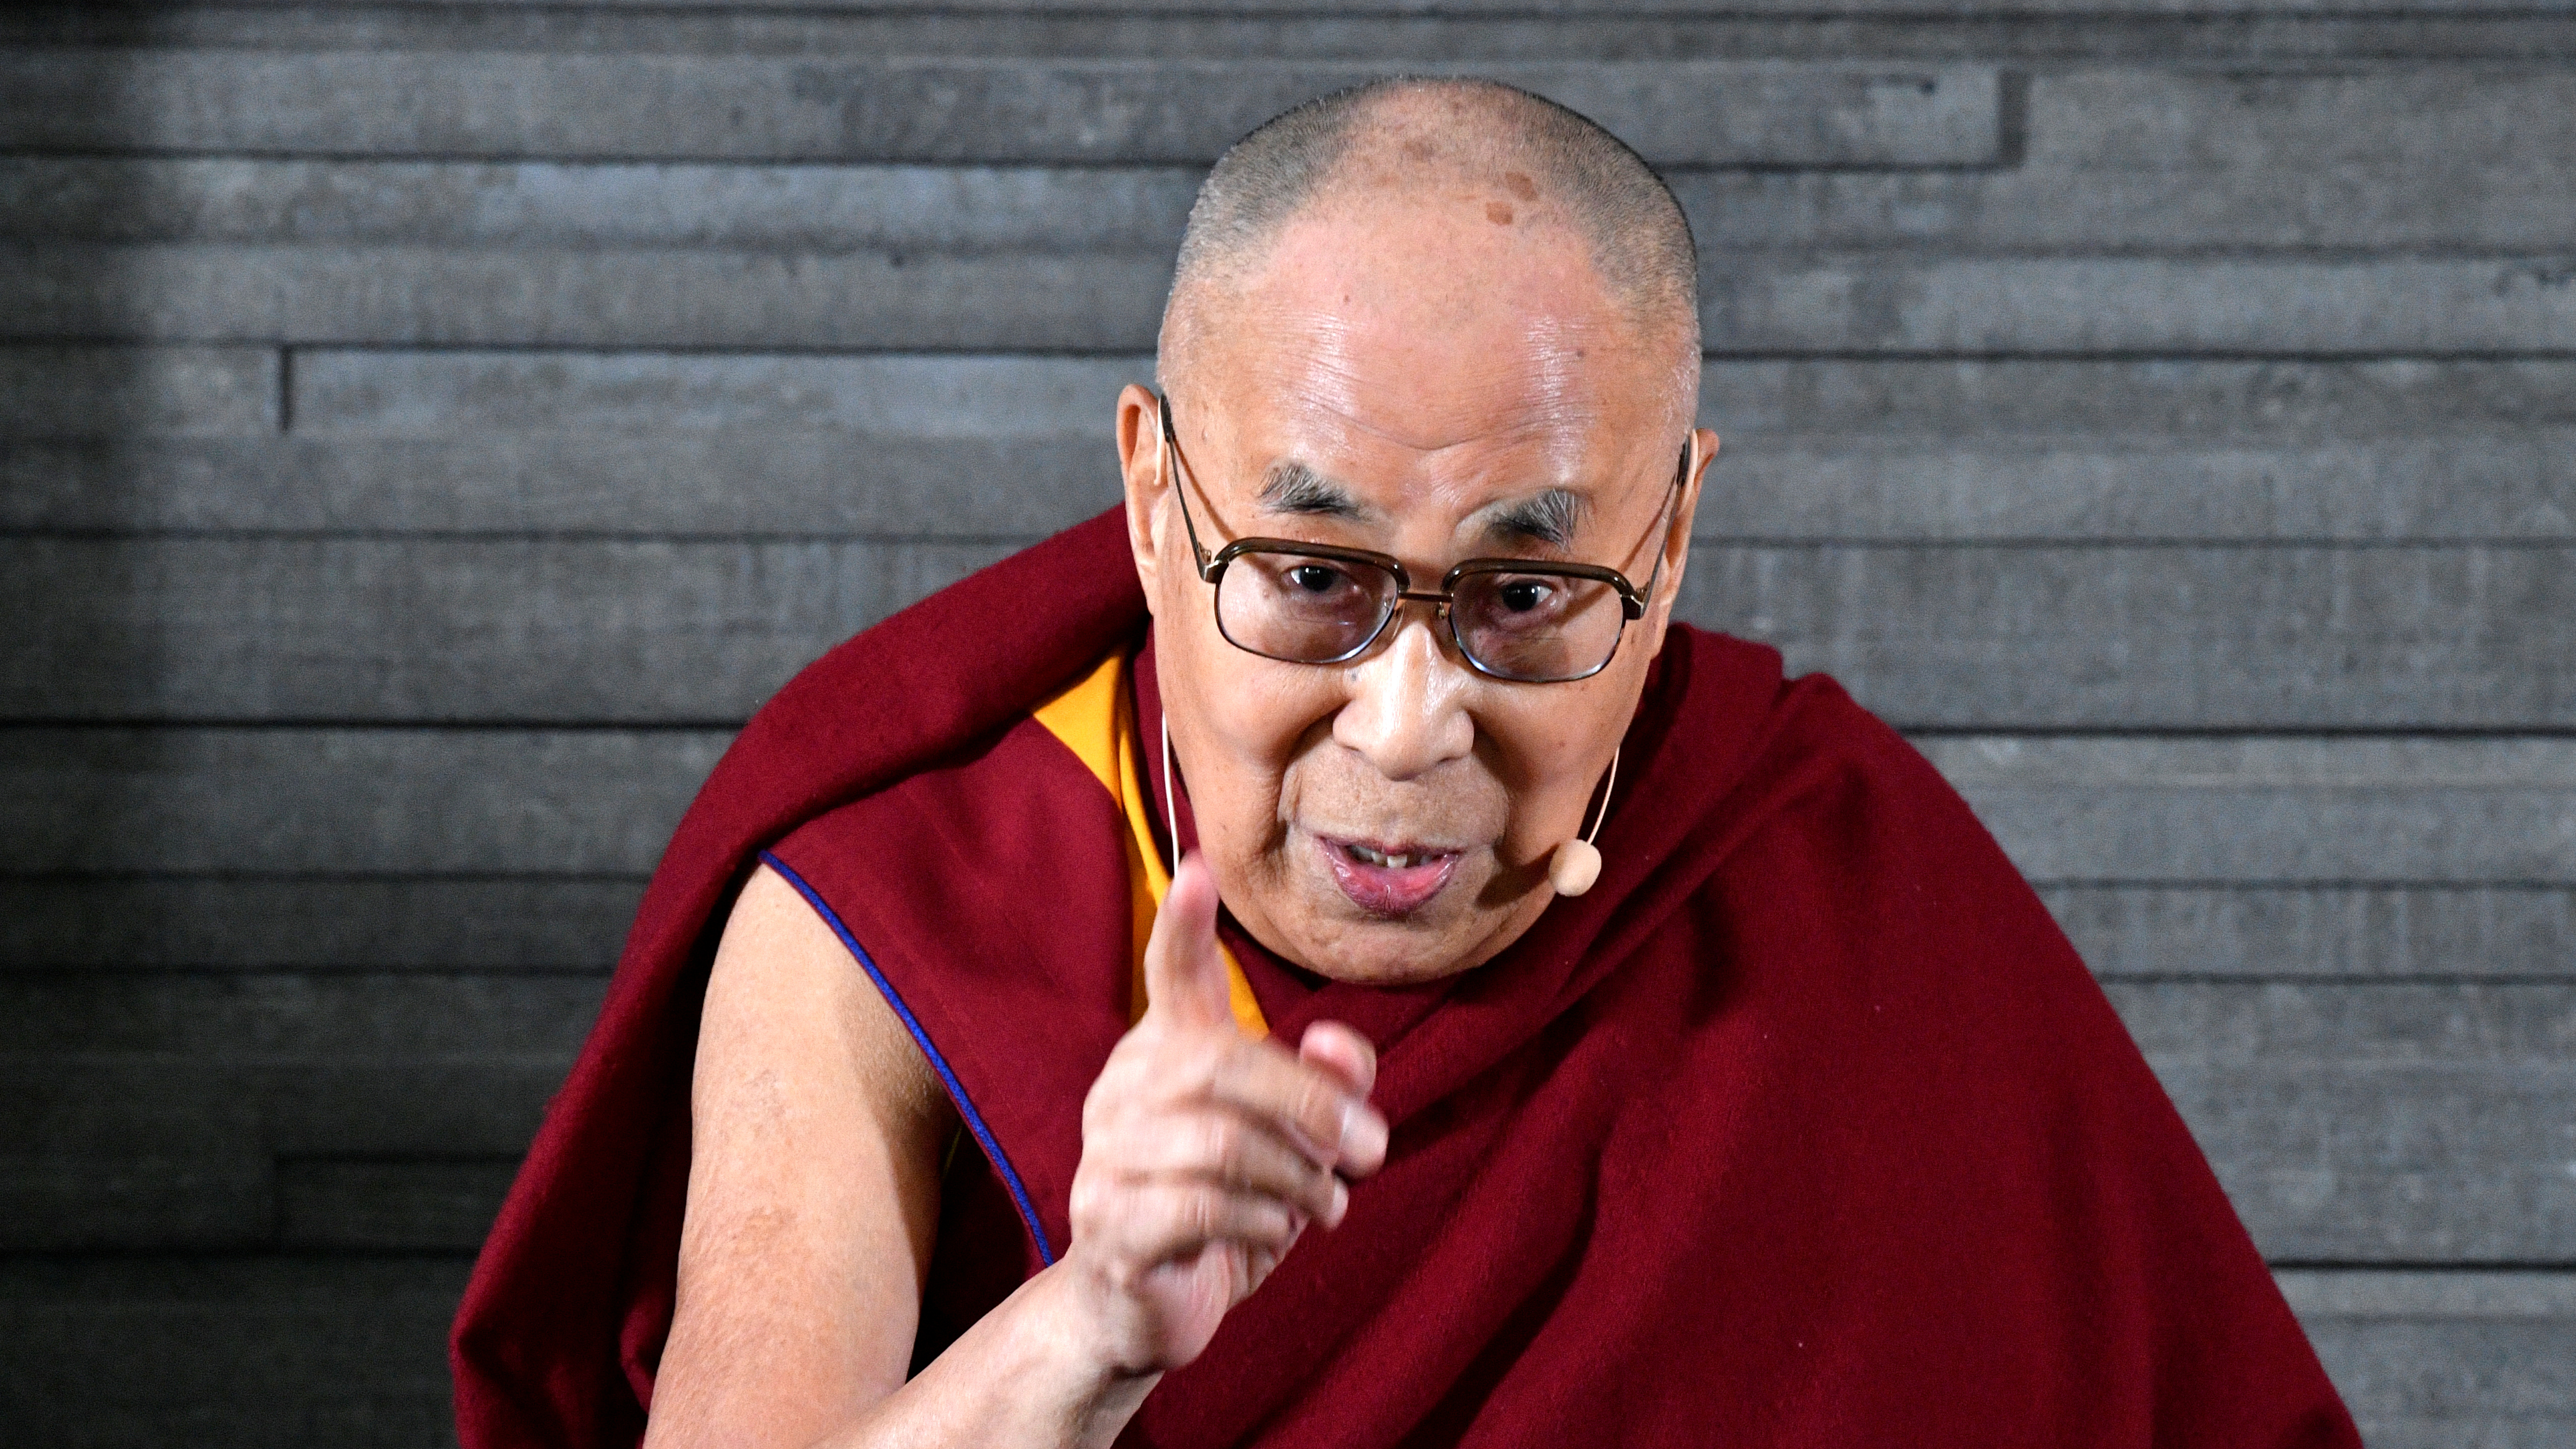 Dalai Lama: China's leaders 'don't understand variety of cultures' | Reuters